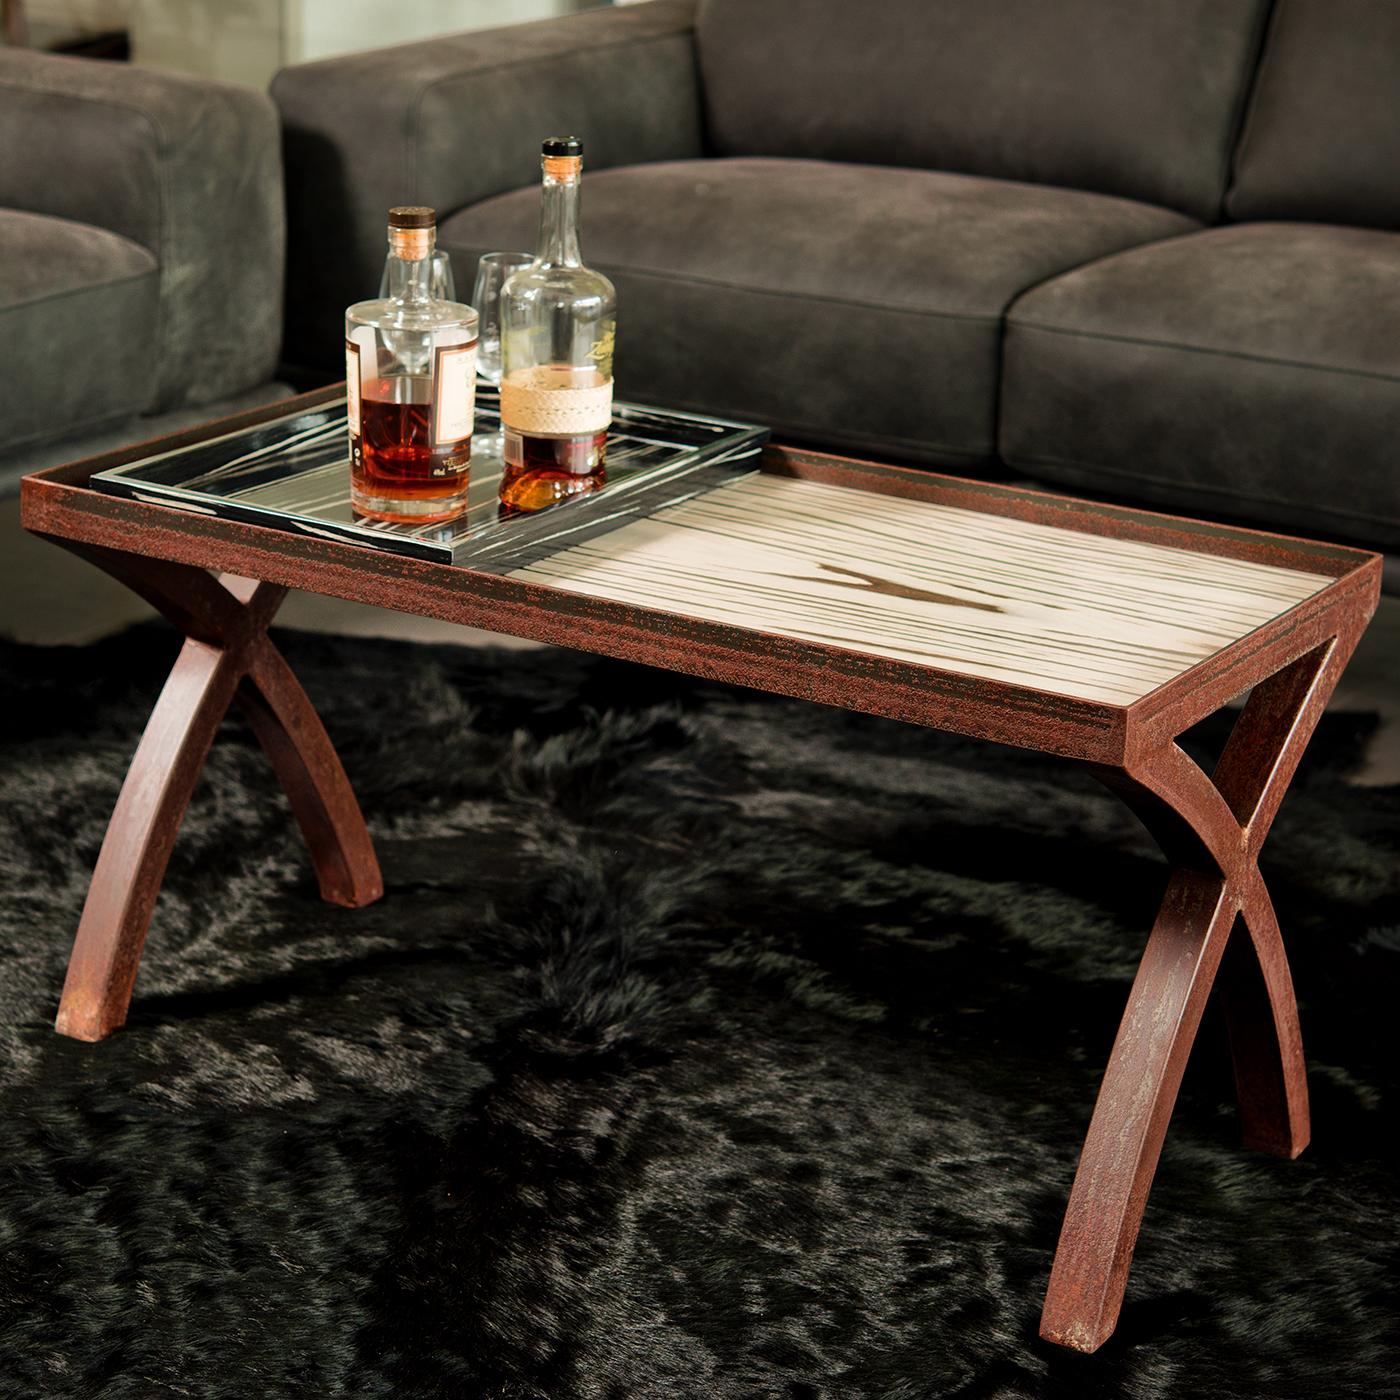 Merging industrial and traditional elements, this coffee table is impeccably crafted by hand. The wood-veneered frame includes two elegantly curved, criss-crossed legs and a rectangular top with raised borders in Corten iron with a captivating